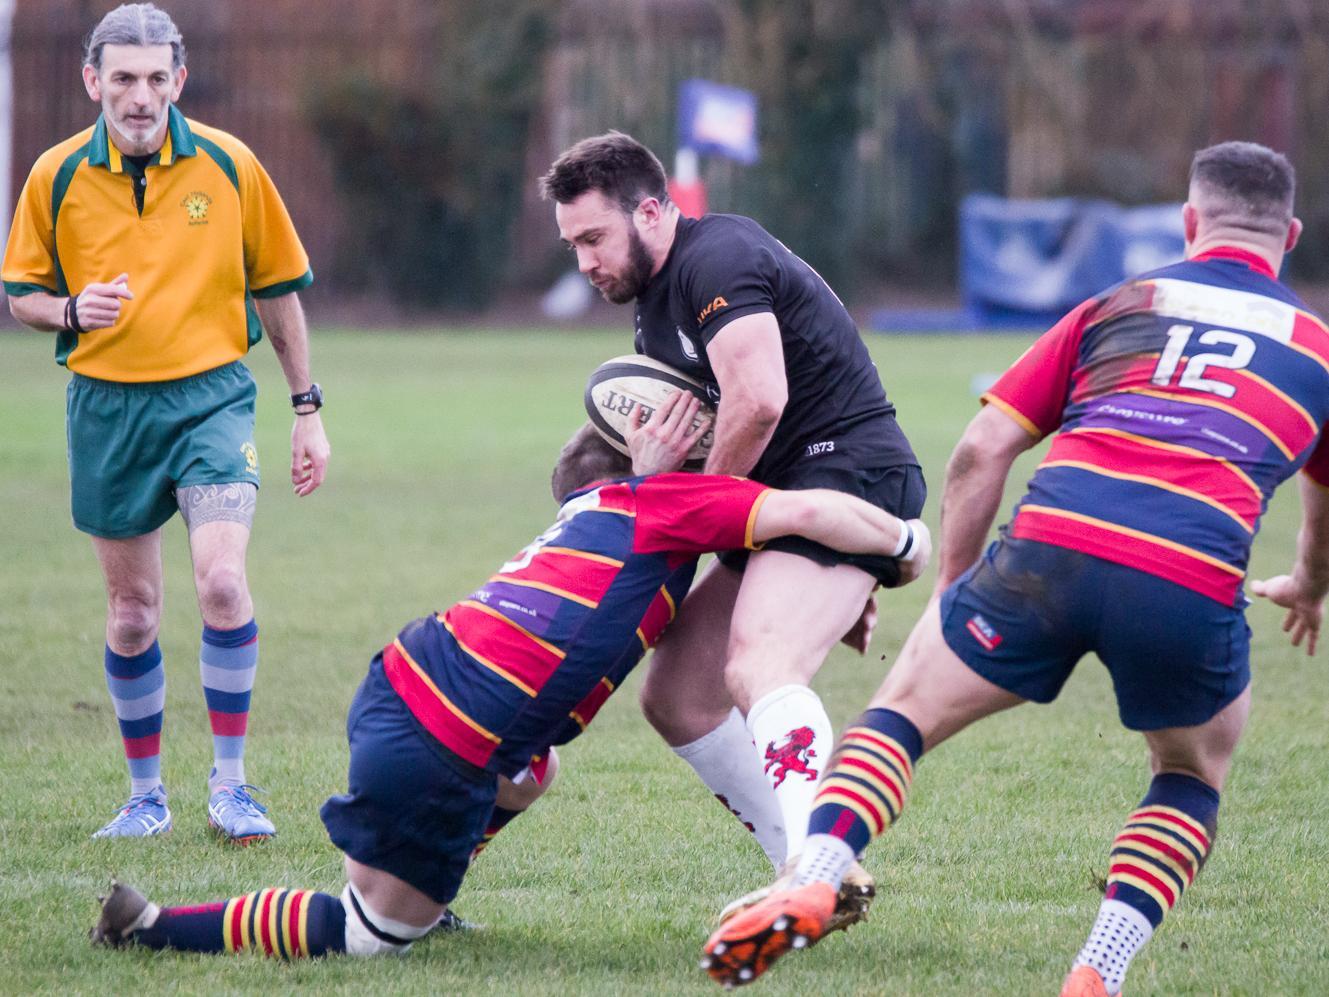 Joshua Czerpak scored a try for Lions in Northampton on Saturday